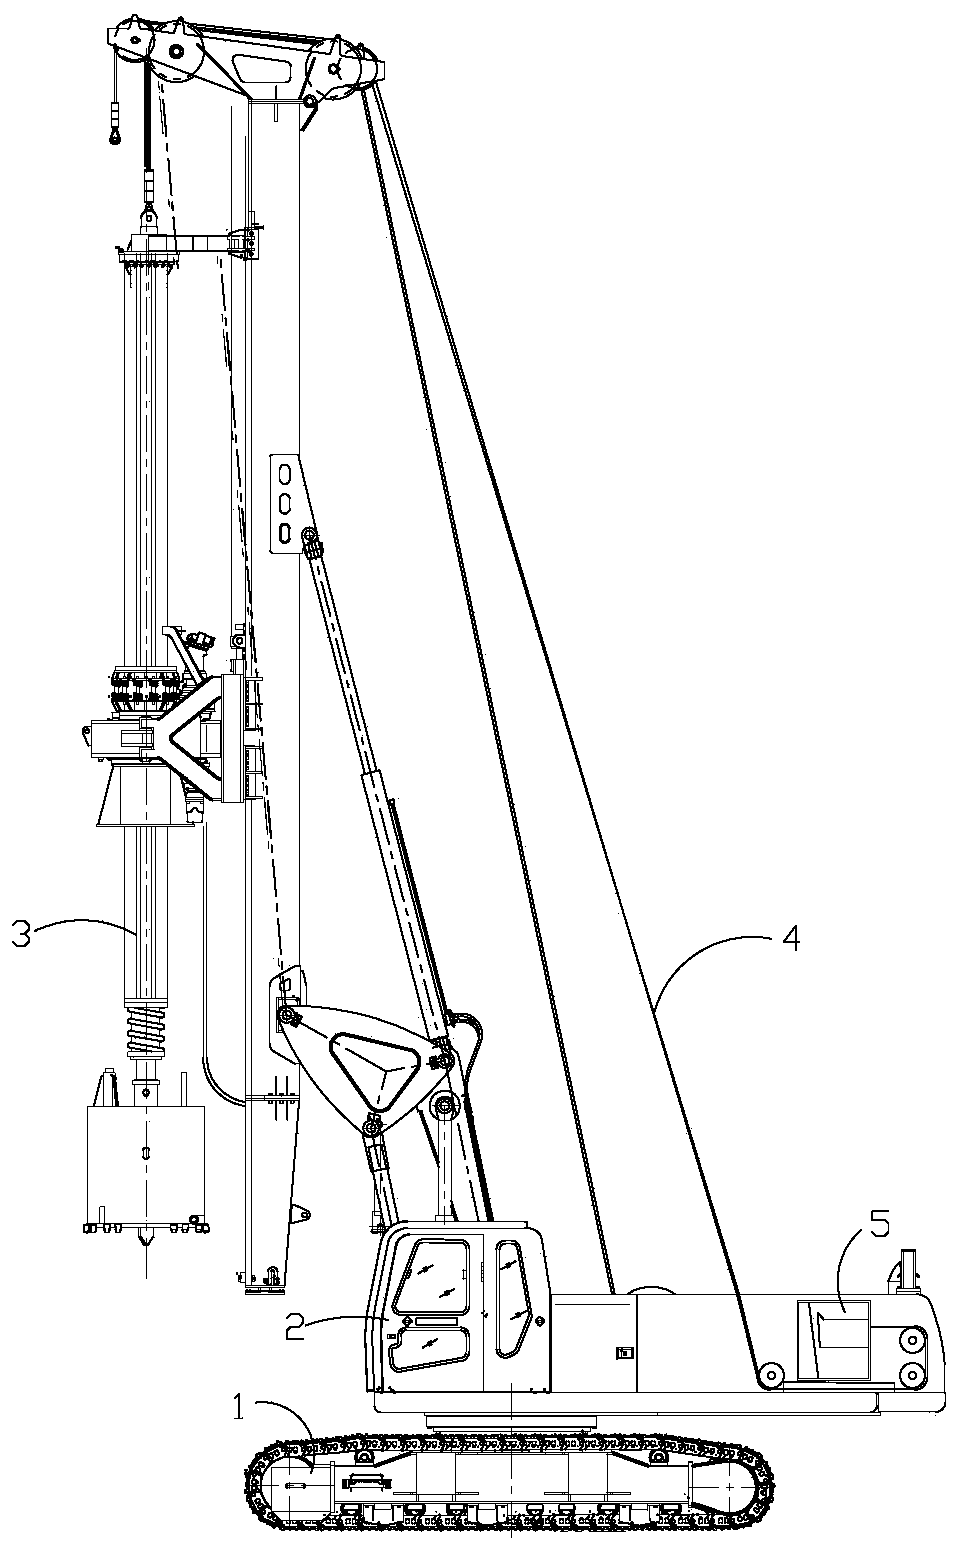 A rotary drilling rig with an automatic counterweight device